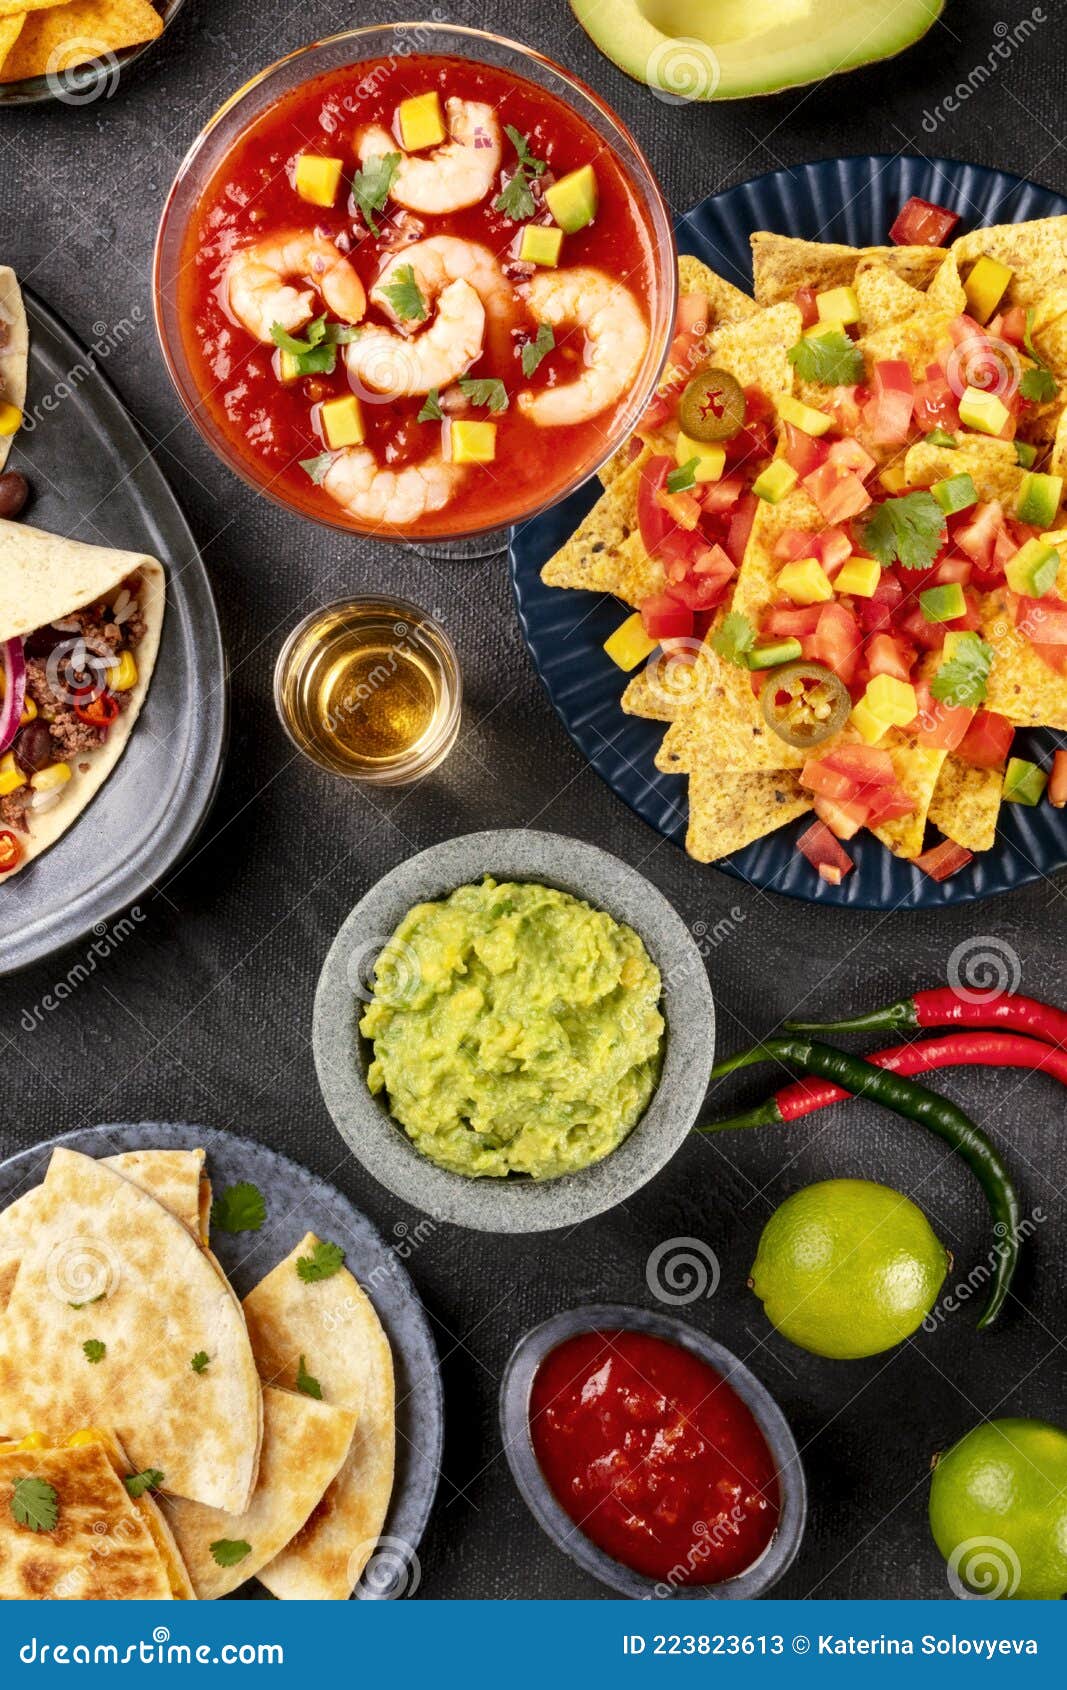 mexican food, many dishes of the cuisine of mexico, flatlay, top shot